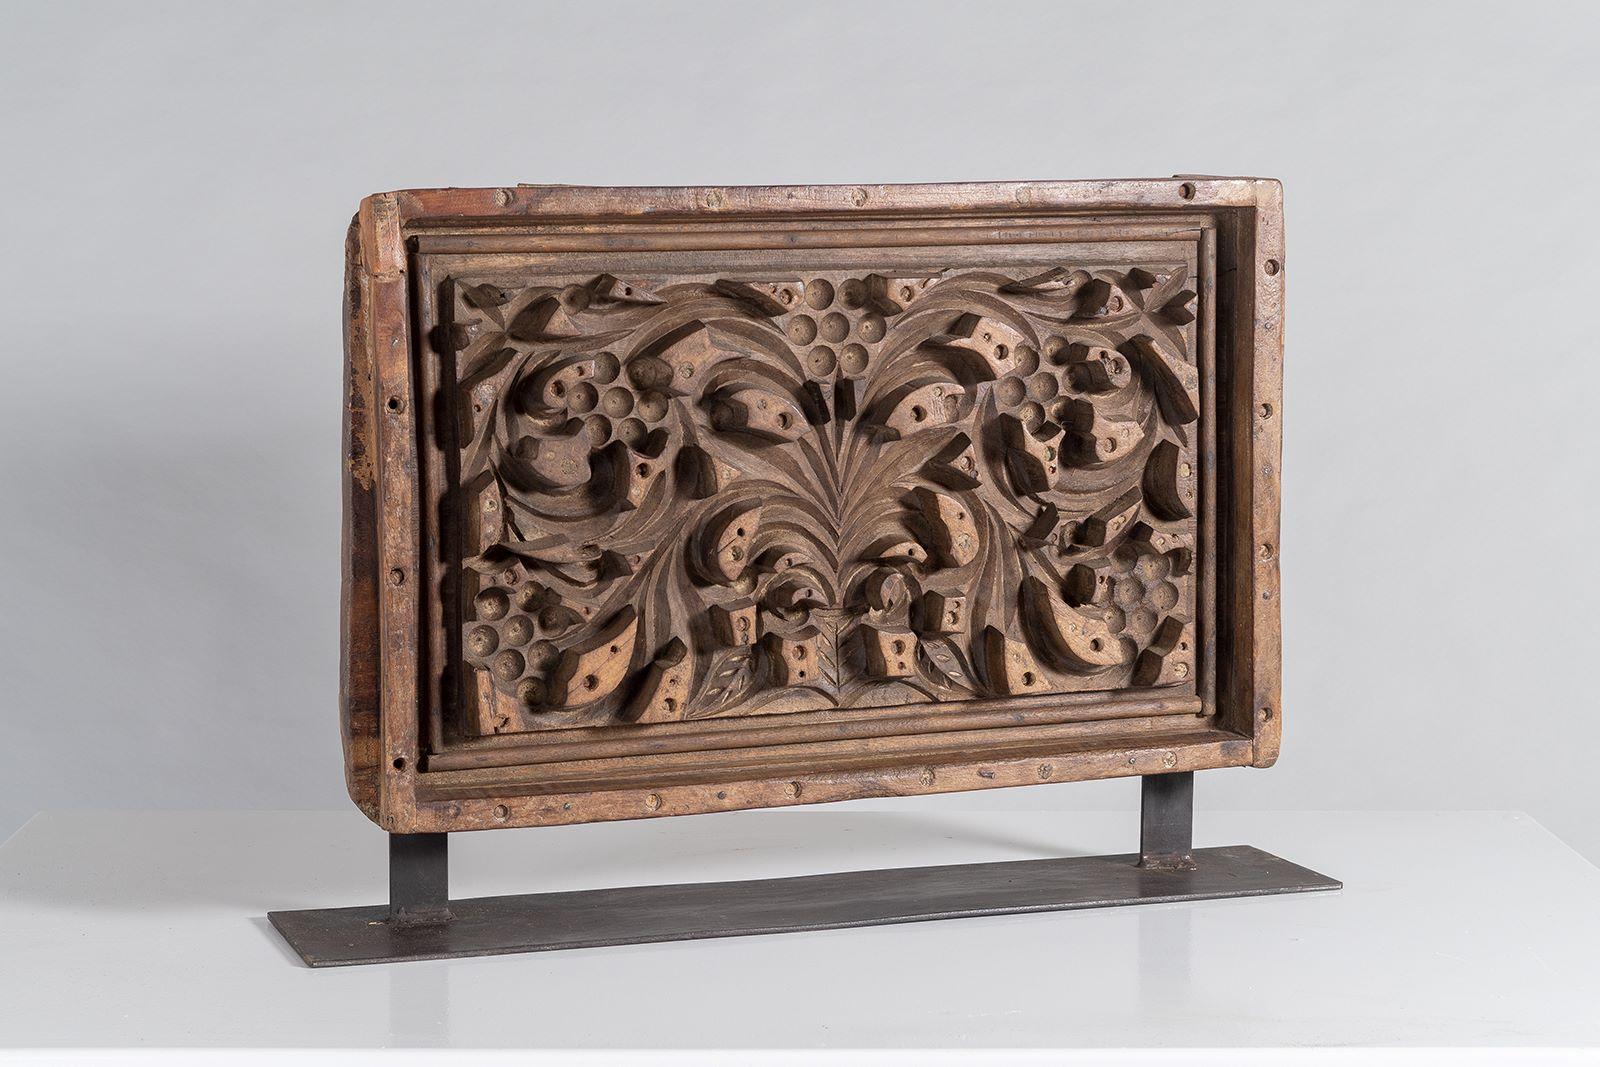 An impressive large scale sculptural wooden shelf art with good form and a beautiful rich warm wood colour tone.   These would have been originally carved for use as plaster moulds for producing decorative wall plaques.  Hand carved symmetrical